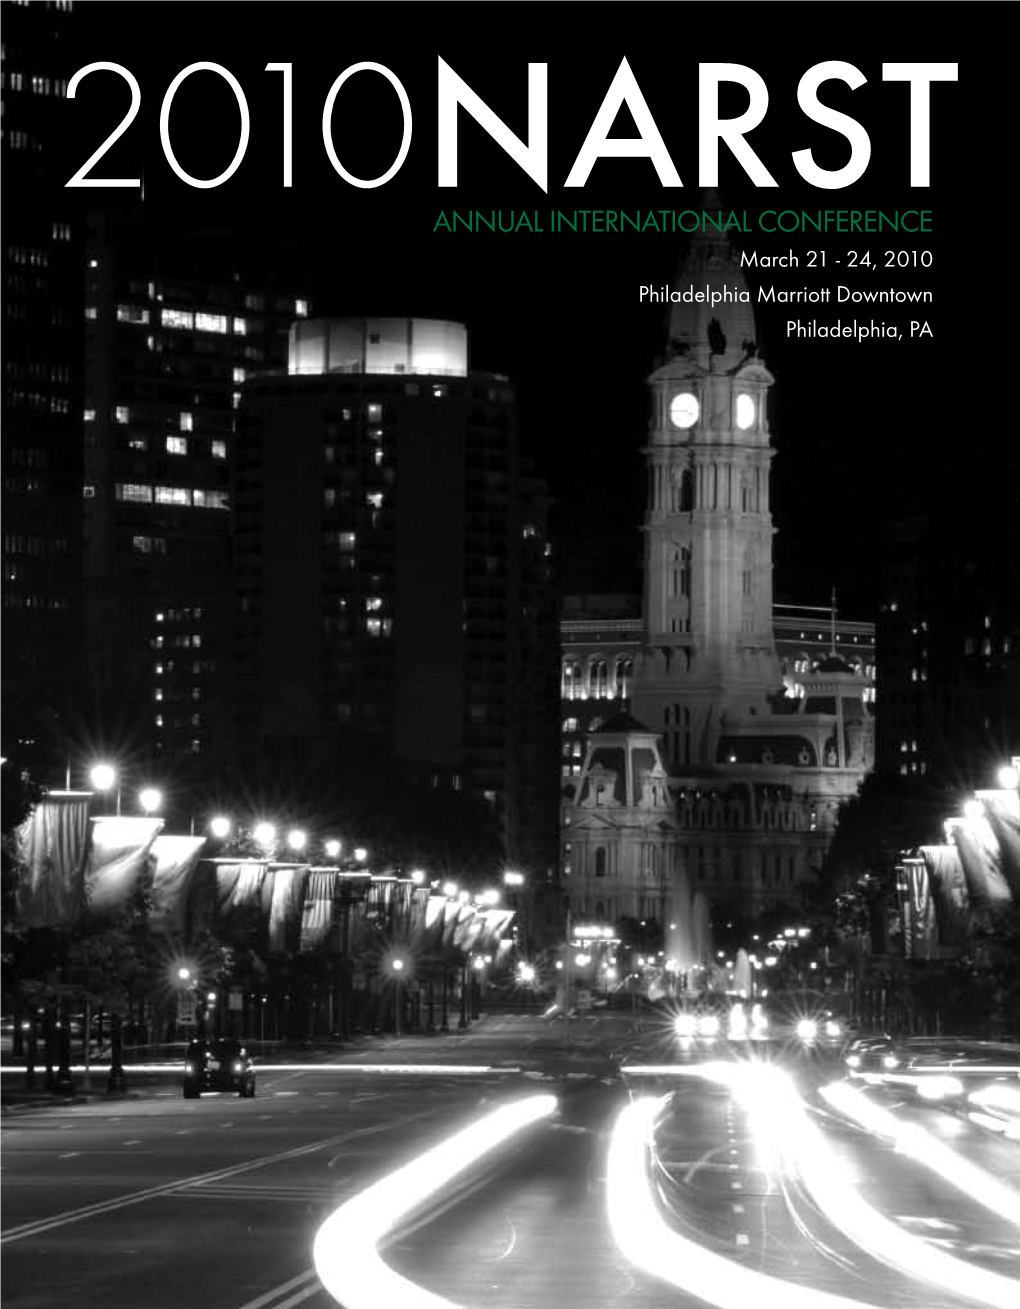 ANNUAL INTERNATIONAL CONFERENCE March 21 - 24, 2010 Philadelphia Marriott Downtown Philadelphia, PA Science Education Journals from Routledge/Taylor & Francis